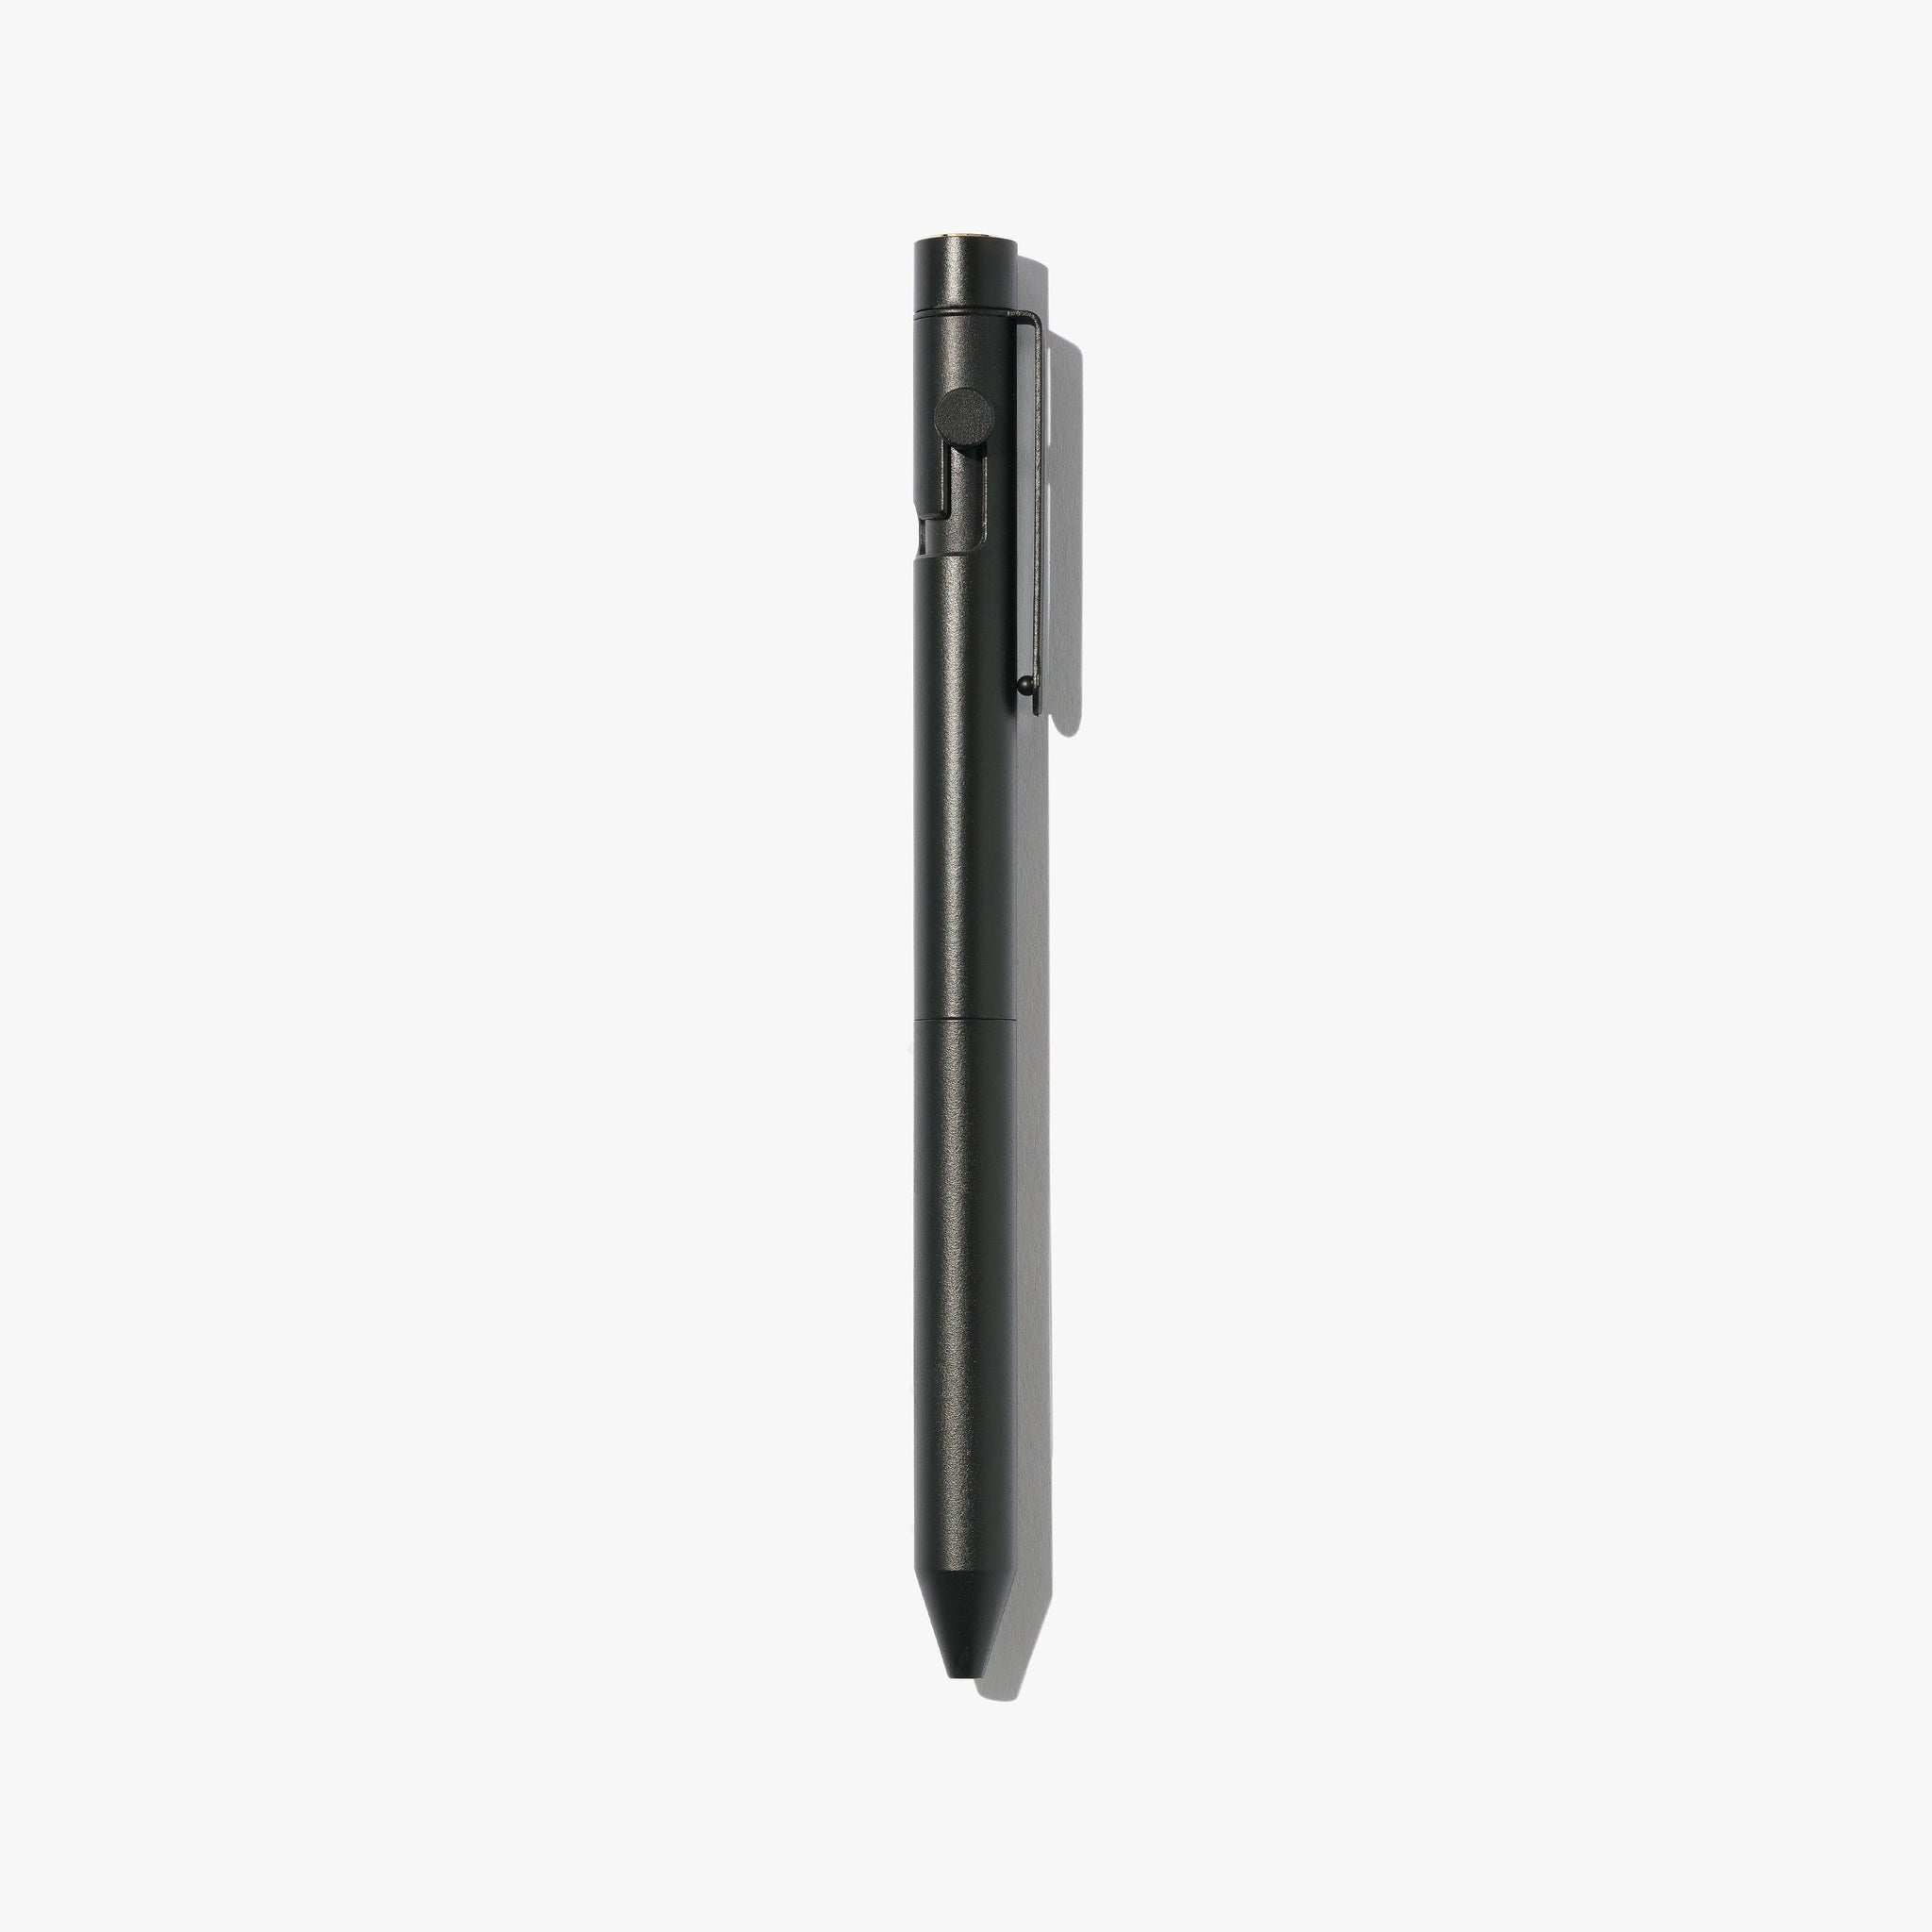 Inventaire - Stylo Bolt Action V.02 (Onyx)